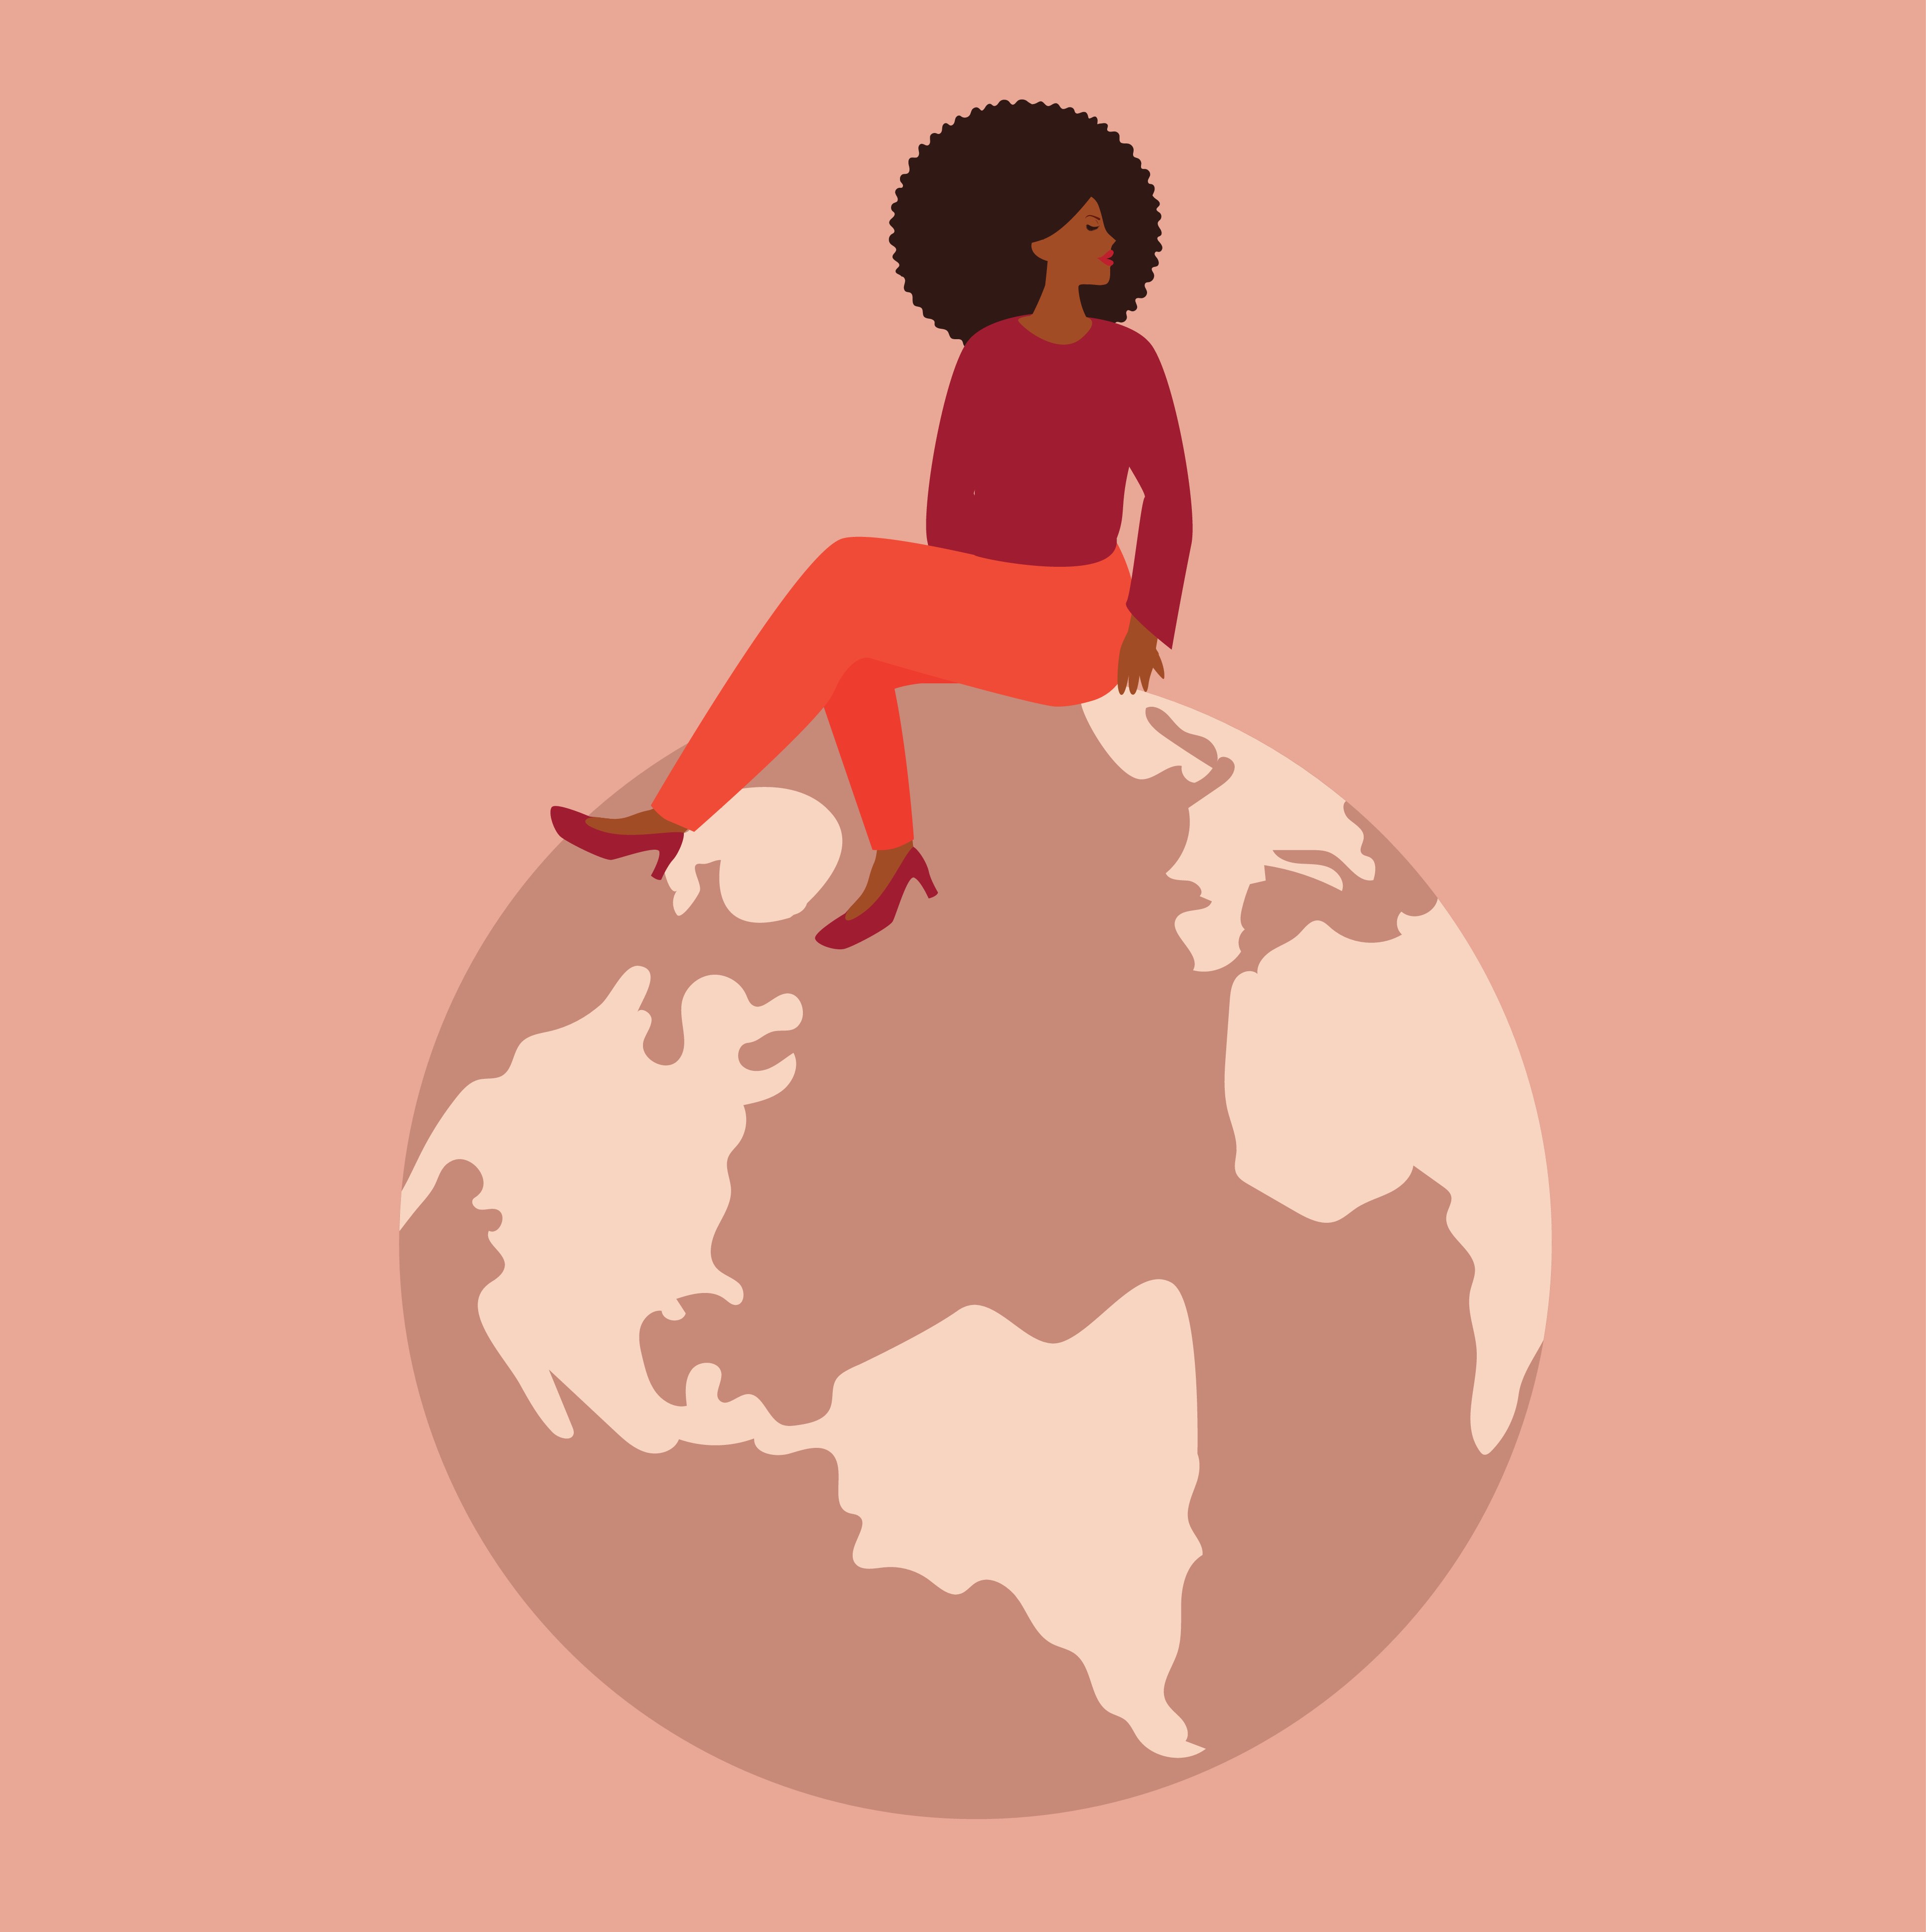 Feminist American African sits on the world globe and looks confident. Activist female around the world. Woman's empowerment movement, energy saving or save the earth day poster concept. Flat vector.